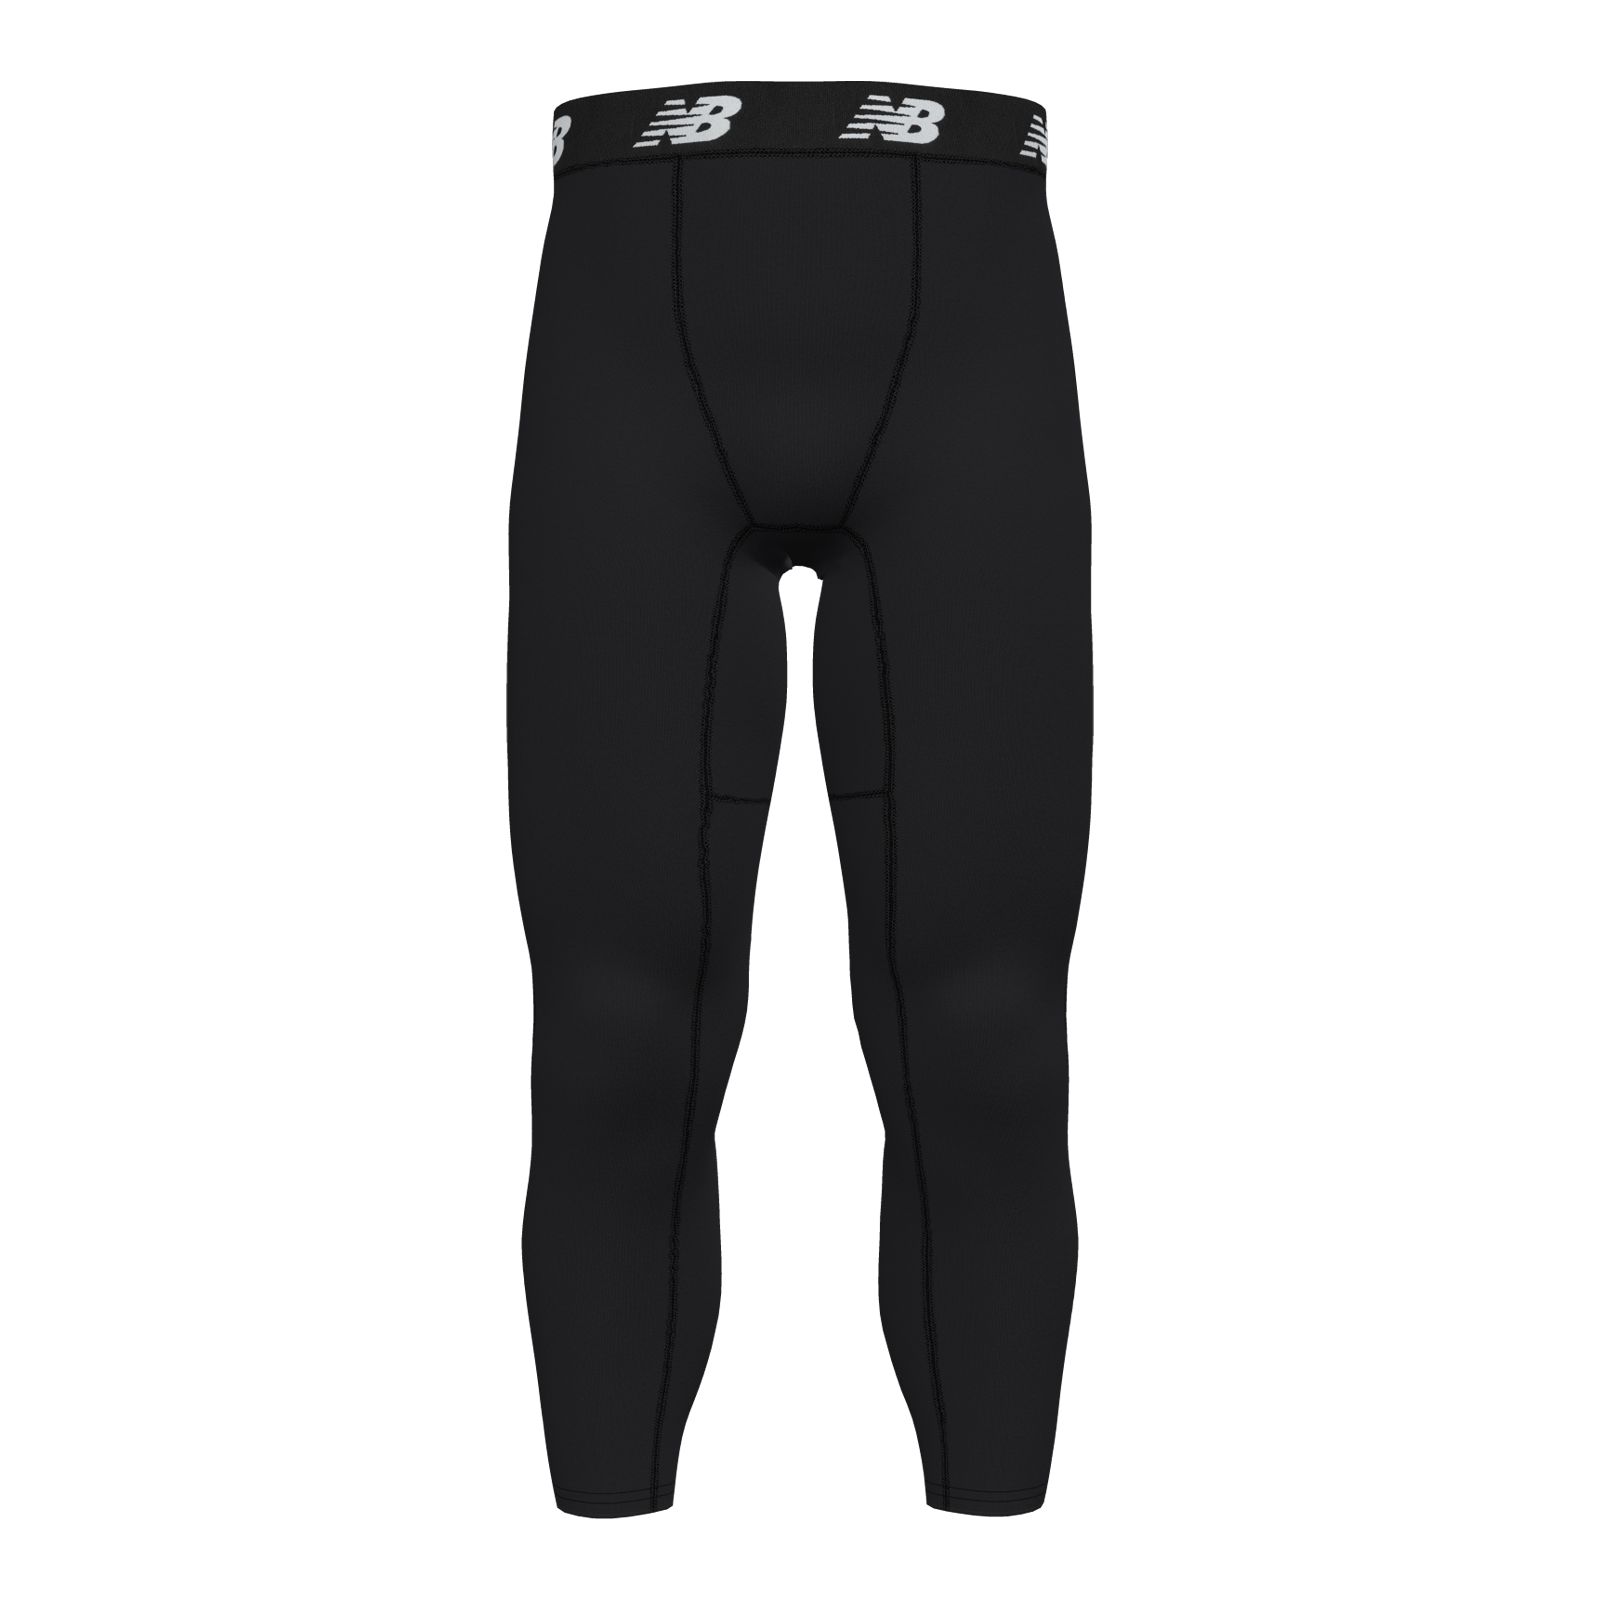 Rep Your Team! Tights, Sports Team Tights